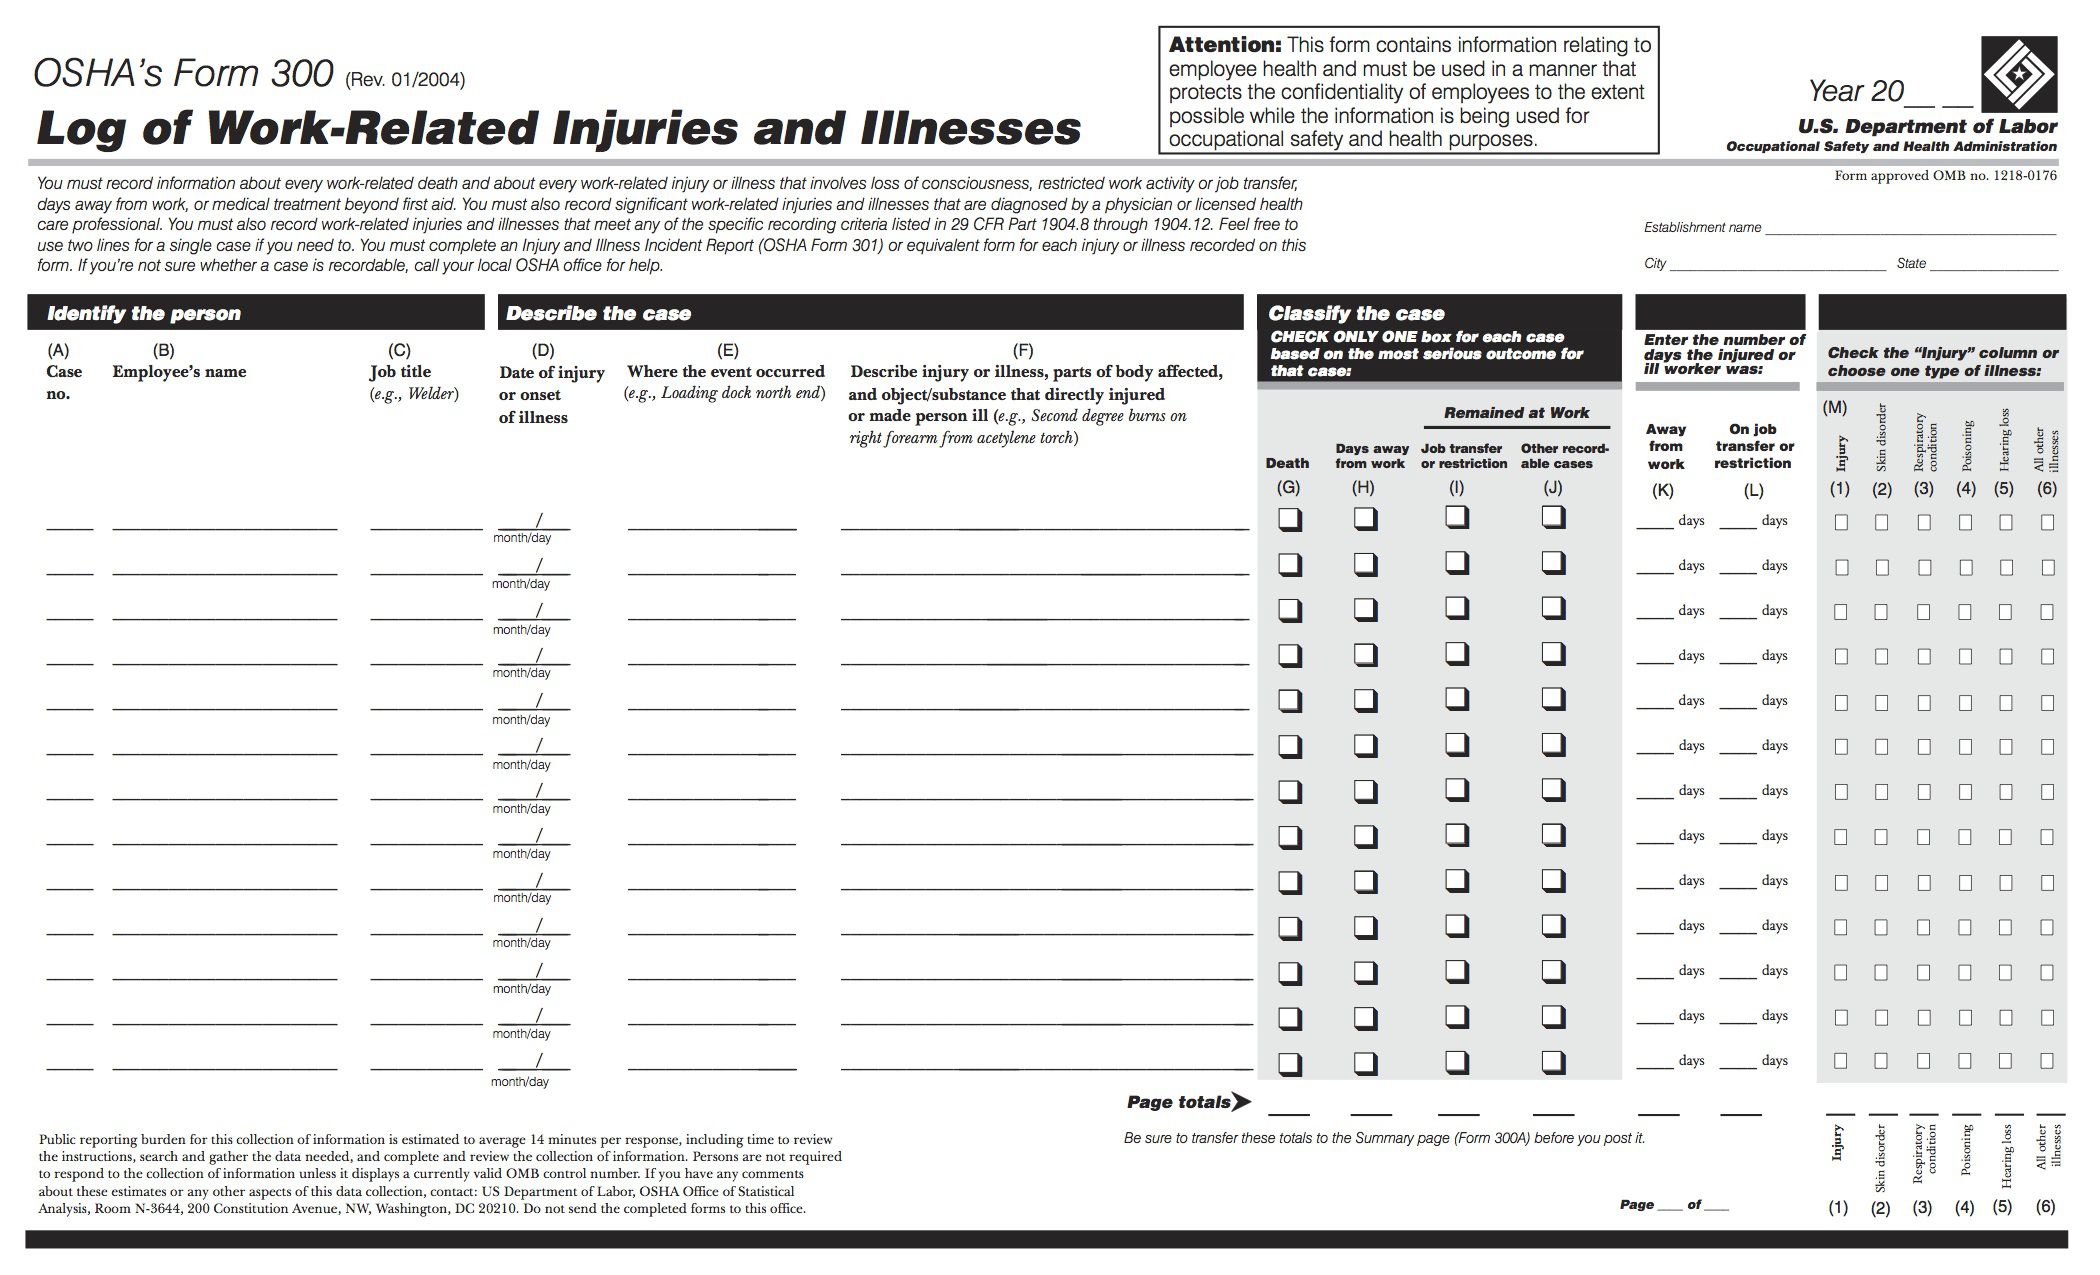 JAN - GuestBlog - Furman Insurance - Recording Extended-time Injuries with the OSHA 300 Form